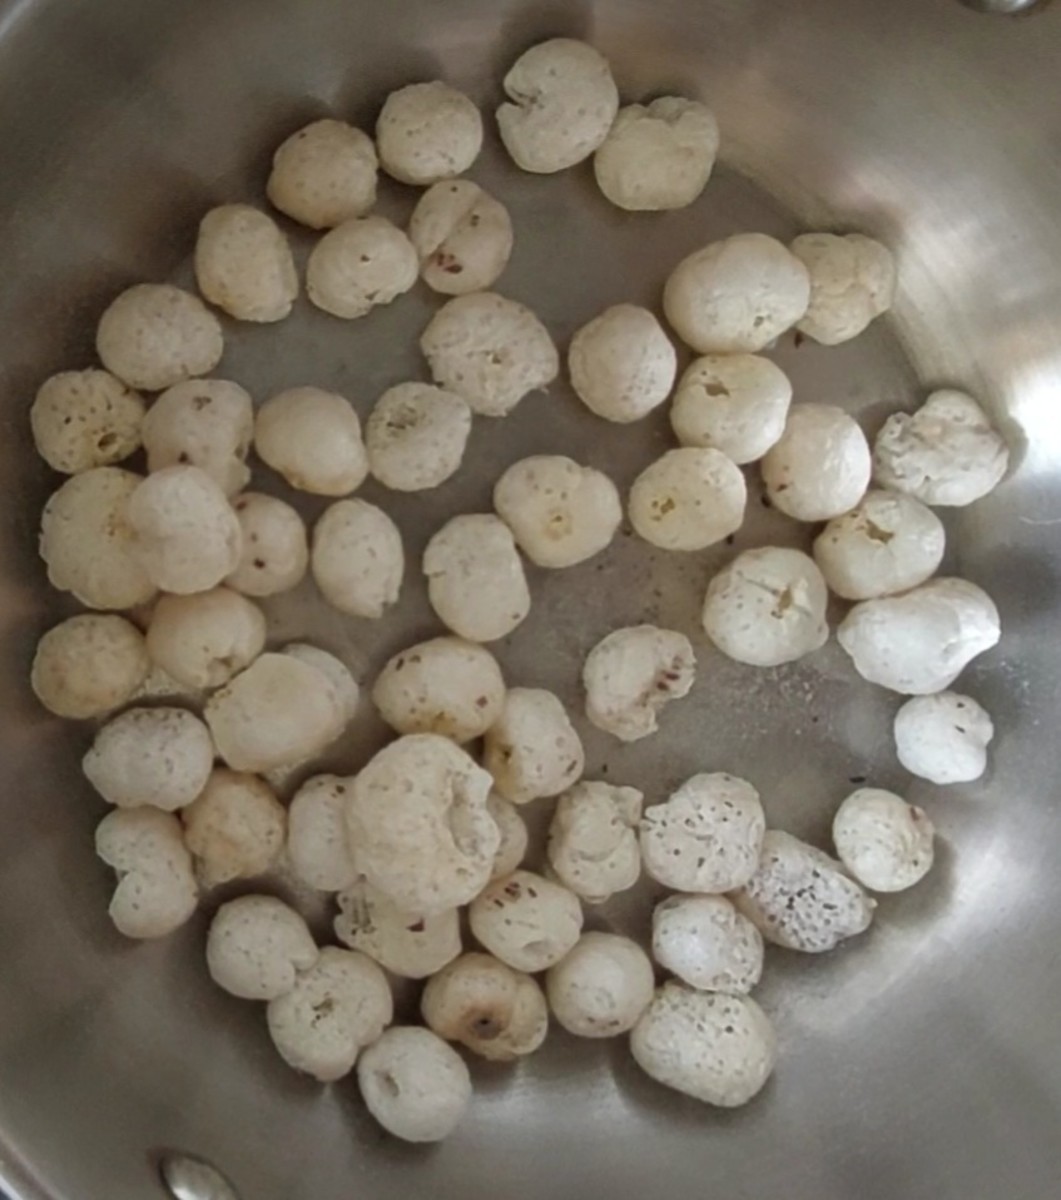 In a pan add 1 cup of lotus seeds (makhana) and fry over low flame till they are almost crisp (do not burn). Transfer to a plate.